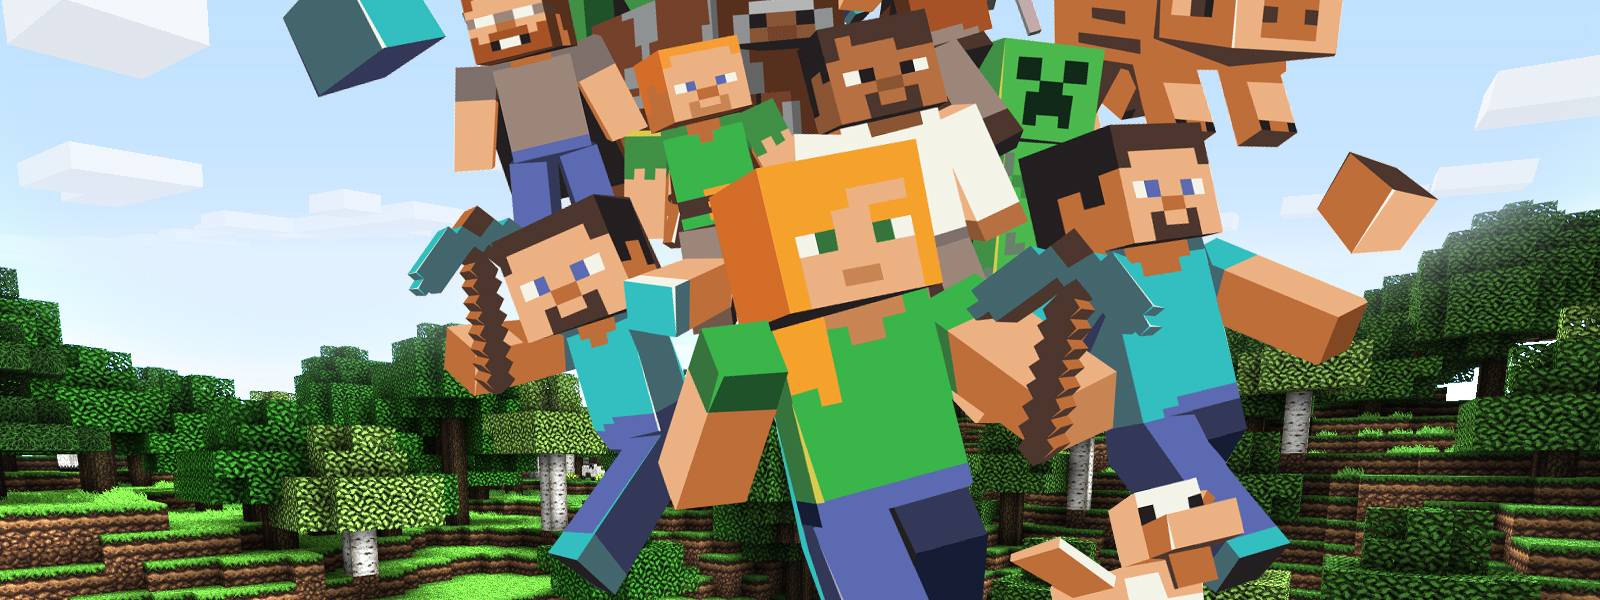 how to get into minecraft tournaments